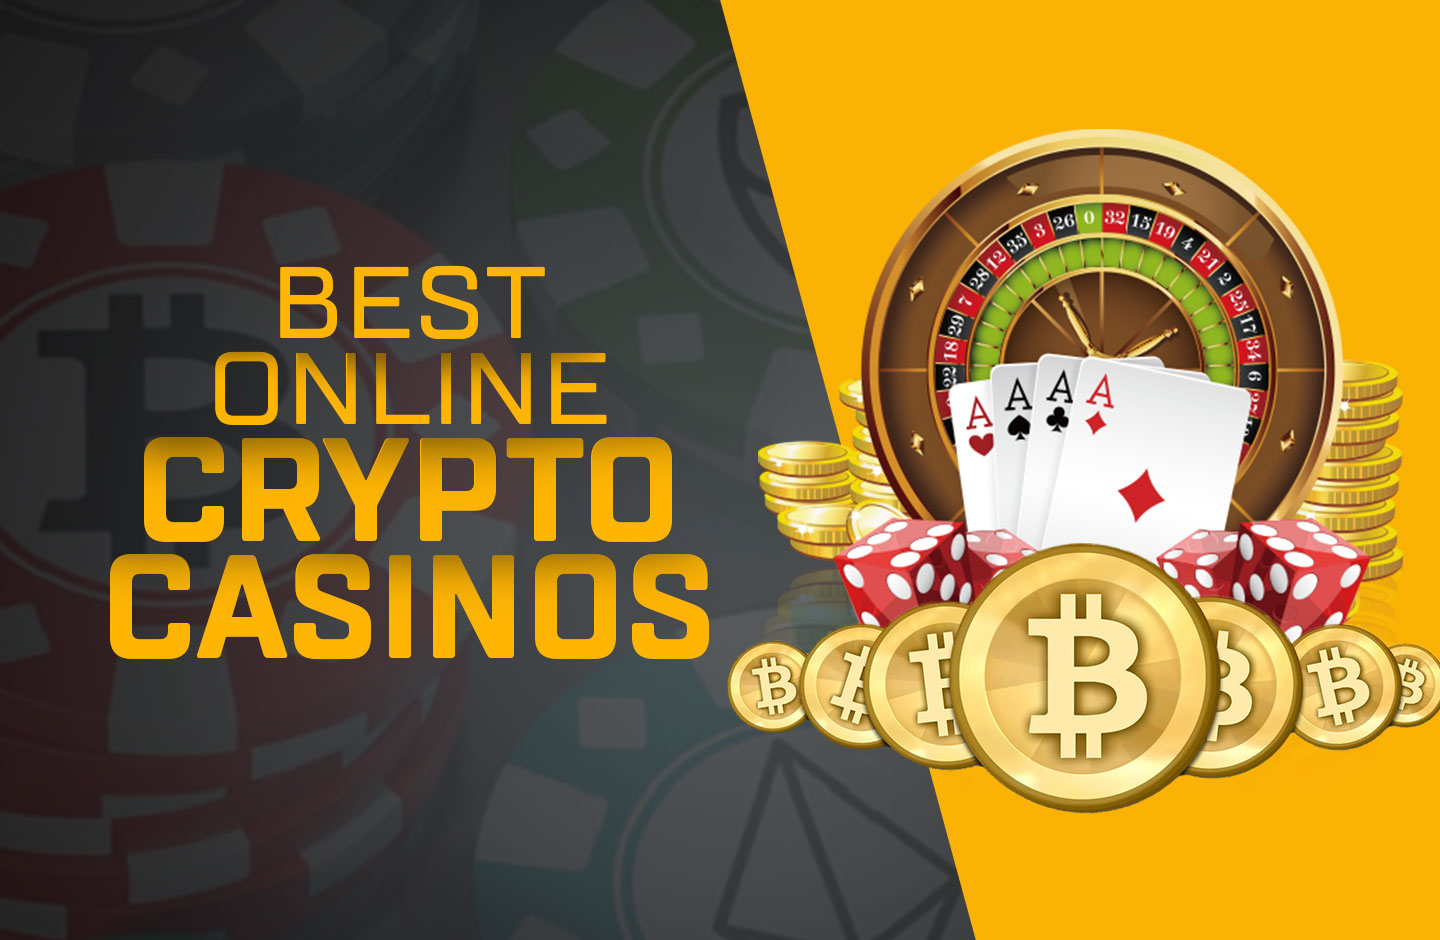 Now You Can Have The best crypto casino Of Your Dreams – Cheaper/Faster Than You Ever Imagined